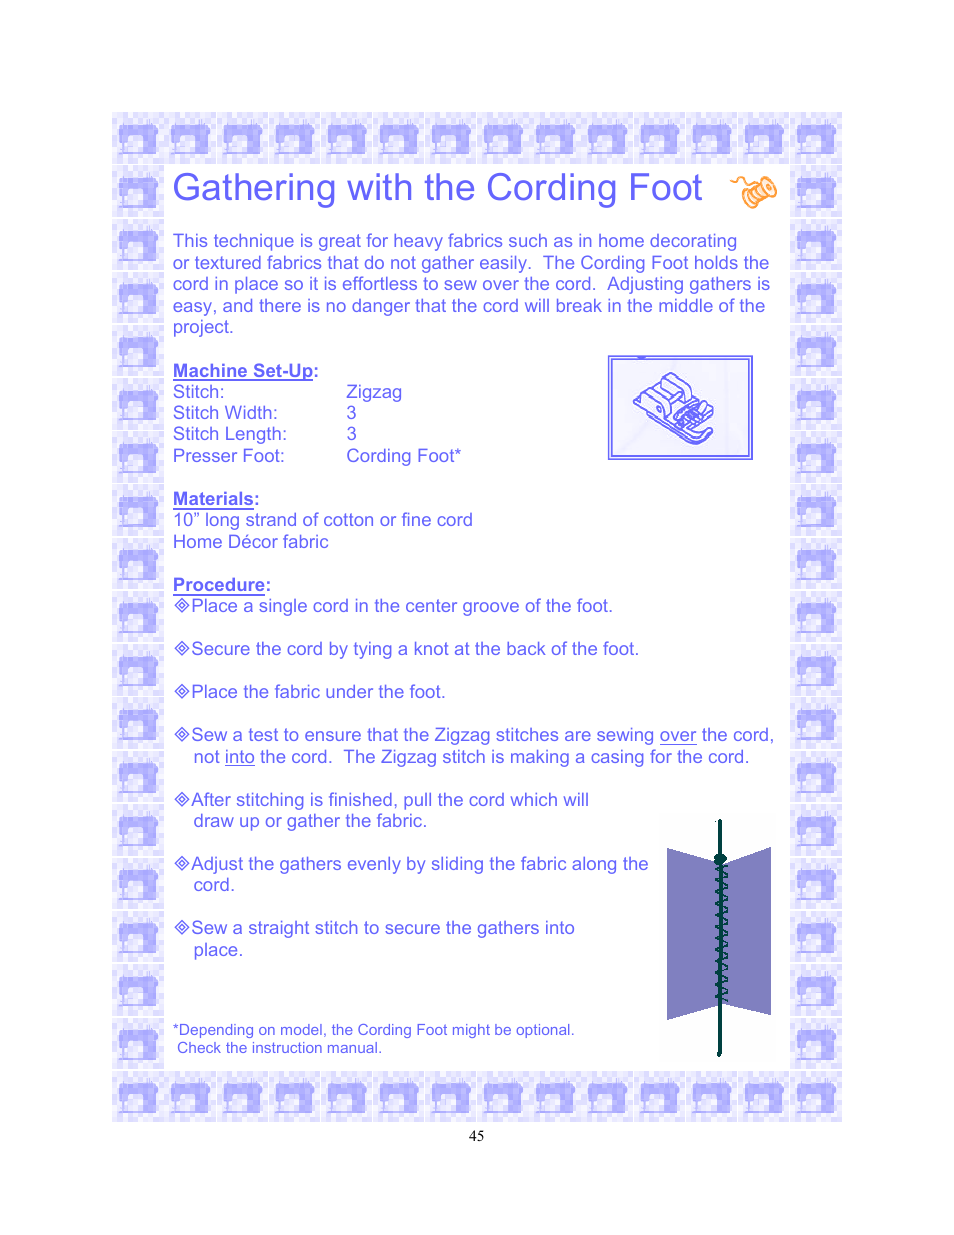 Gathering with the cording foot | SINGER 6550-WORKBOOK Scholastic User Manual | Page 49 / 59